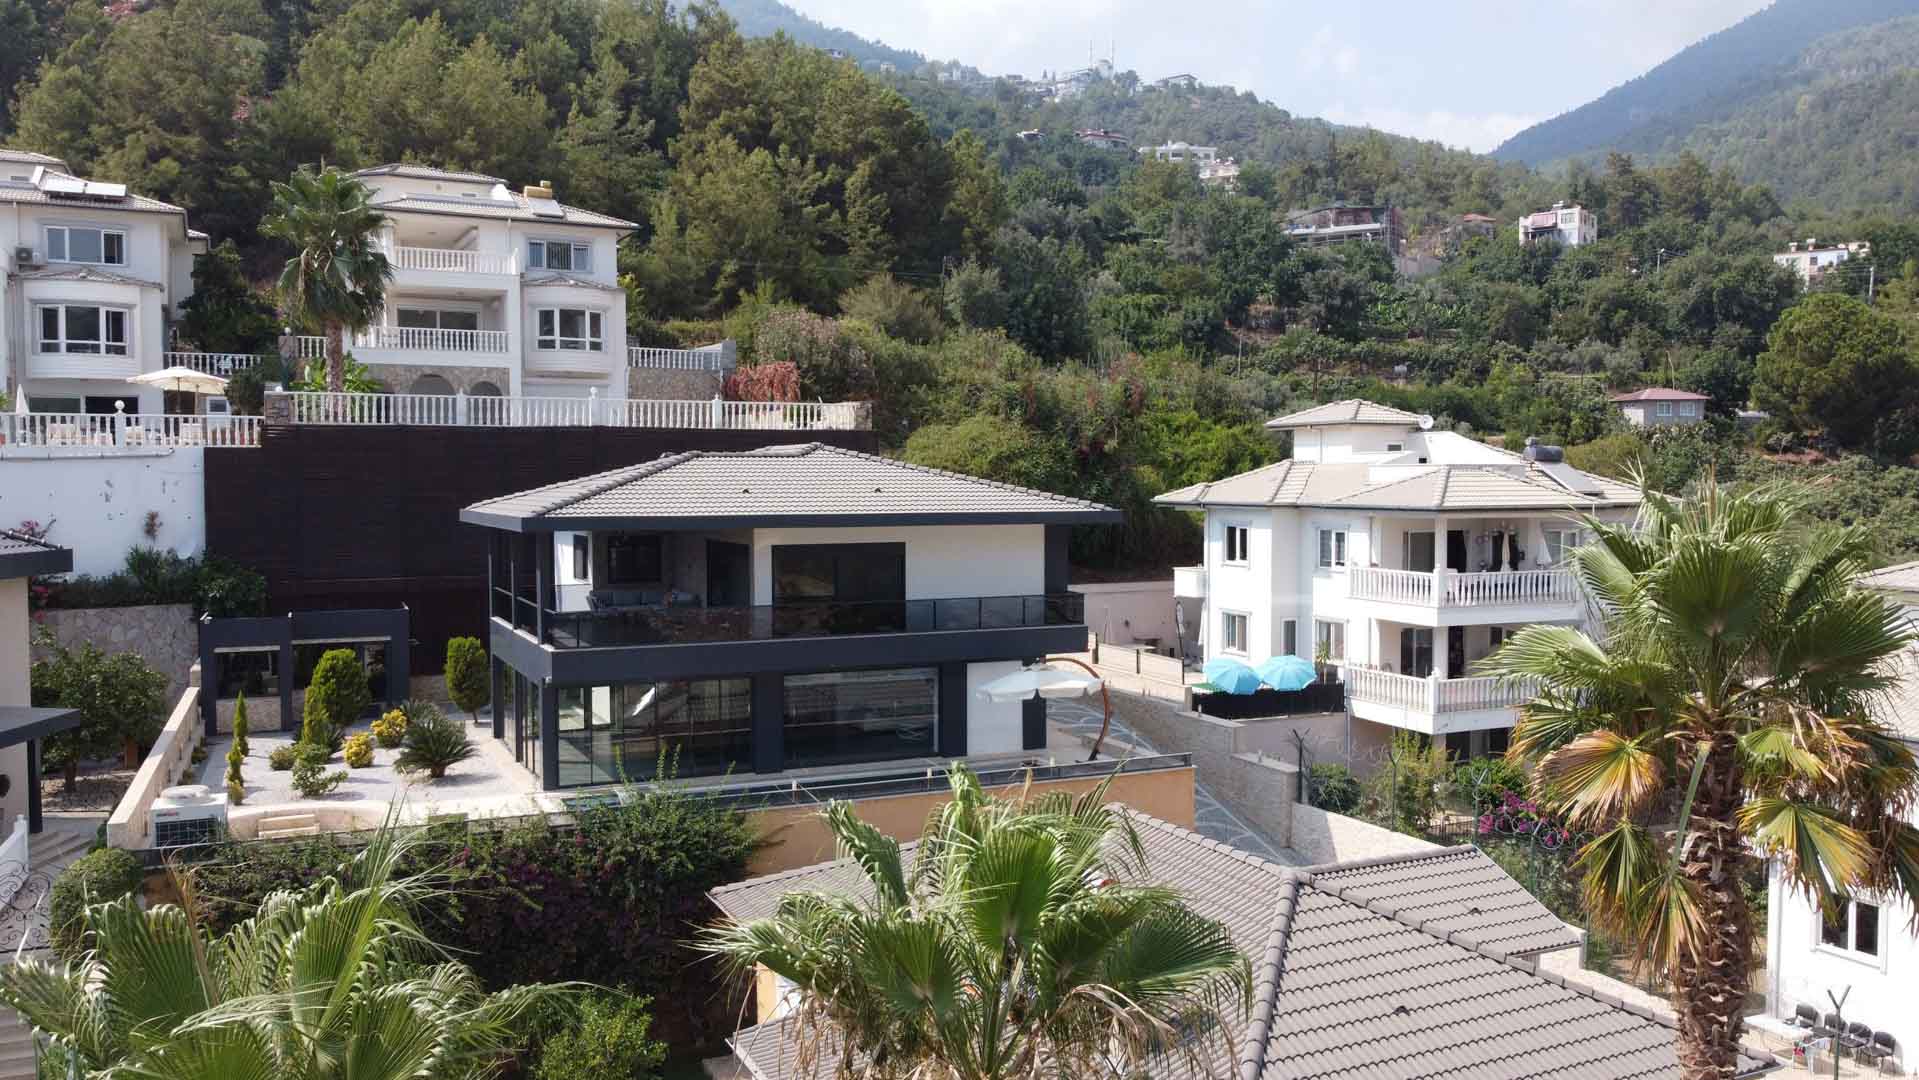 id1033-villa-11-with-vip-infrastructure-and-a-view-of-the-alanya-fortress-37.jpg